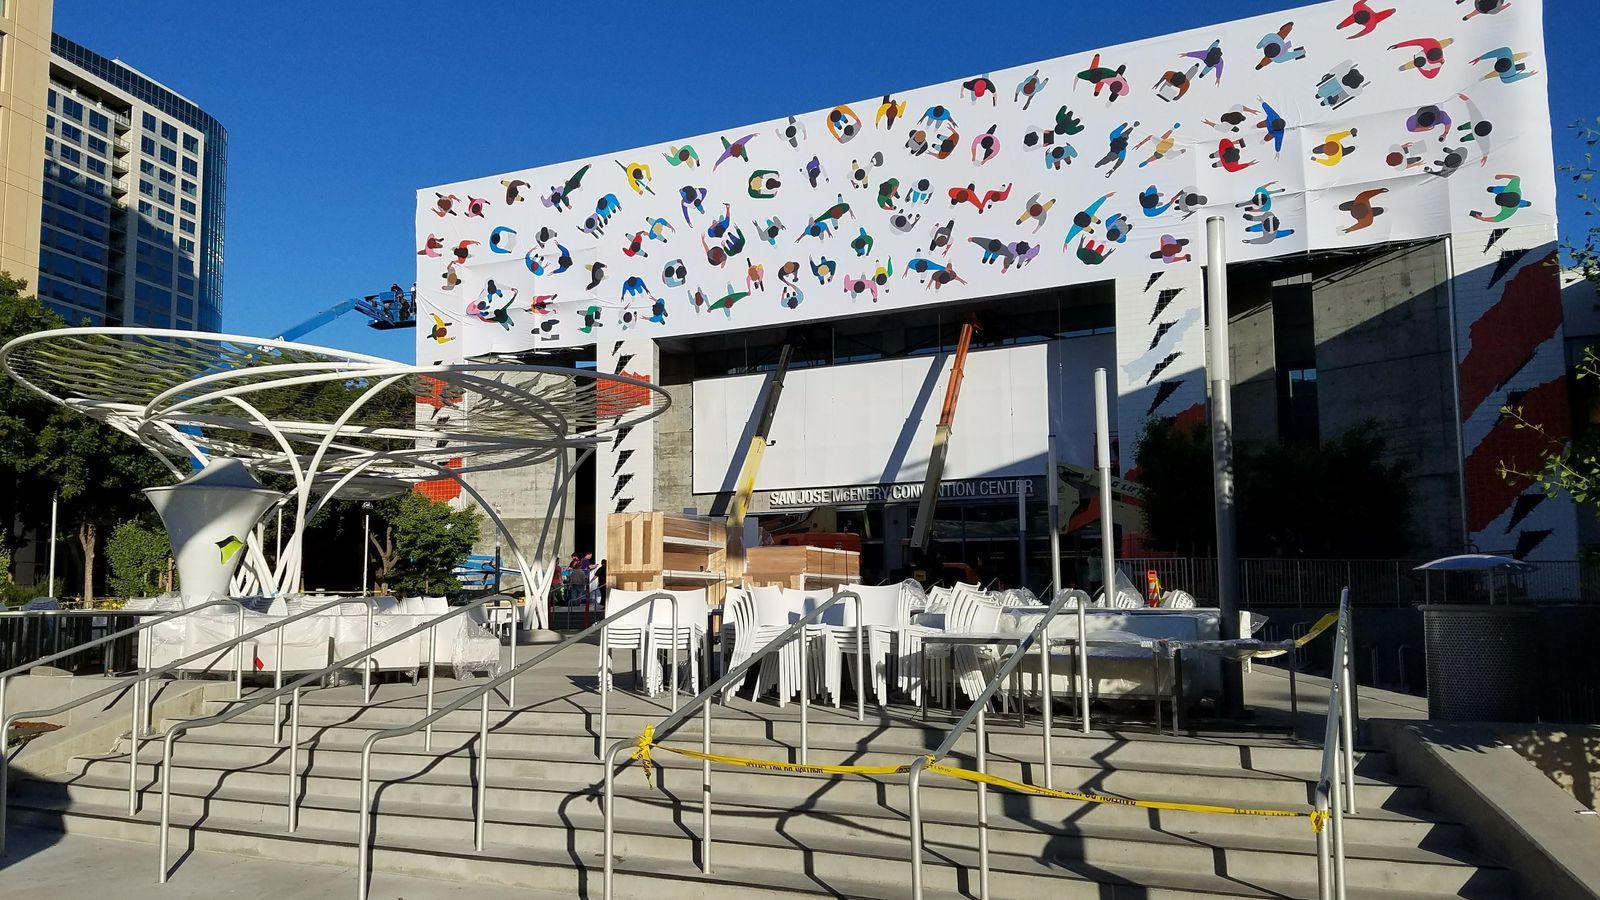 Apple WWDC  things to do in San Jose, CA